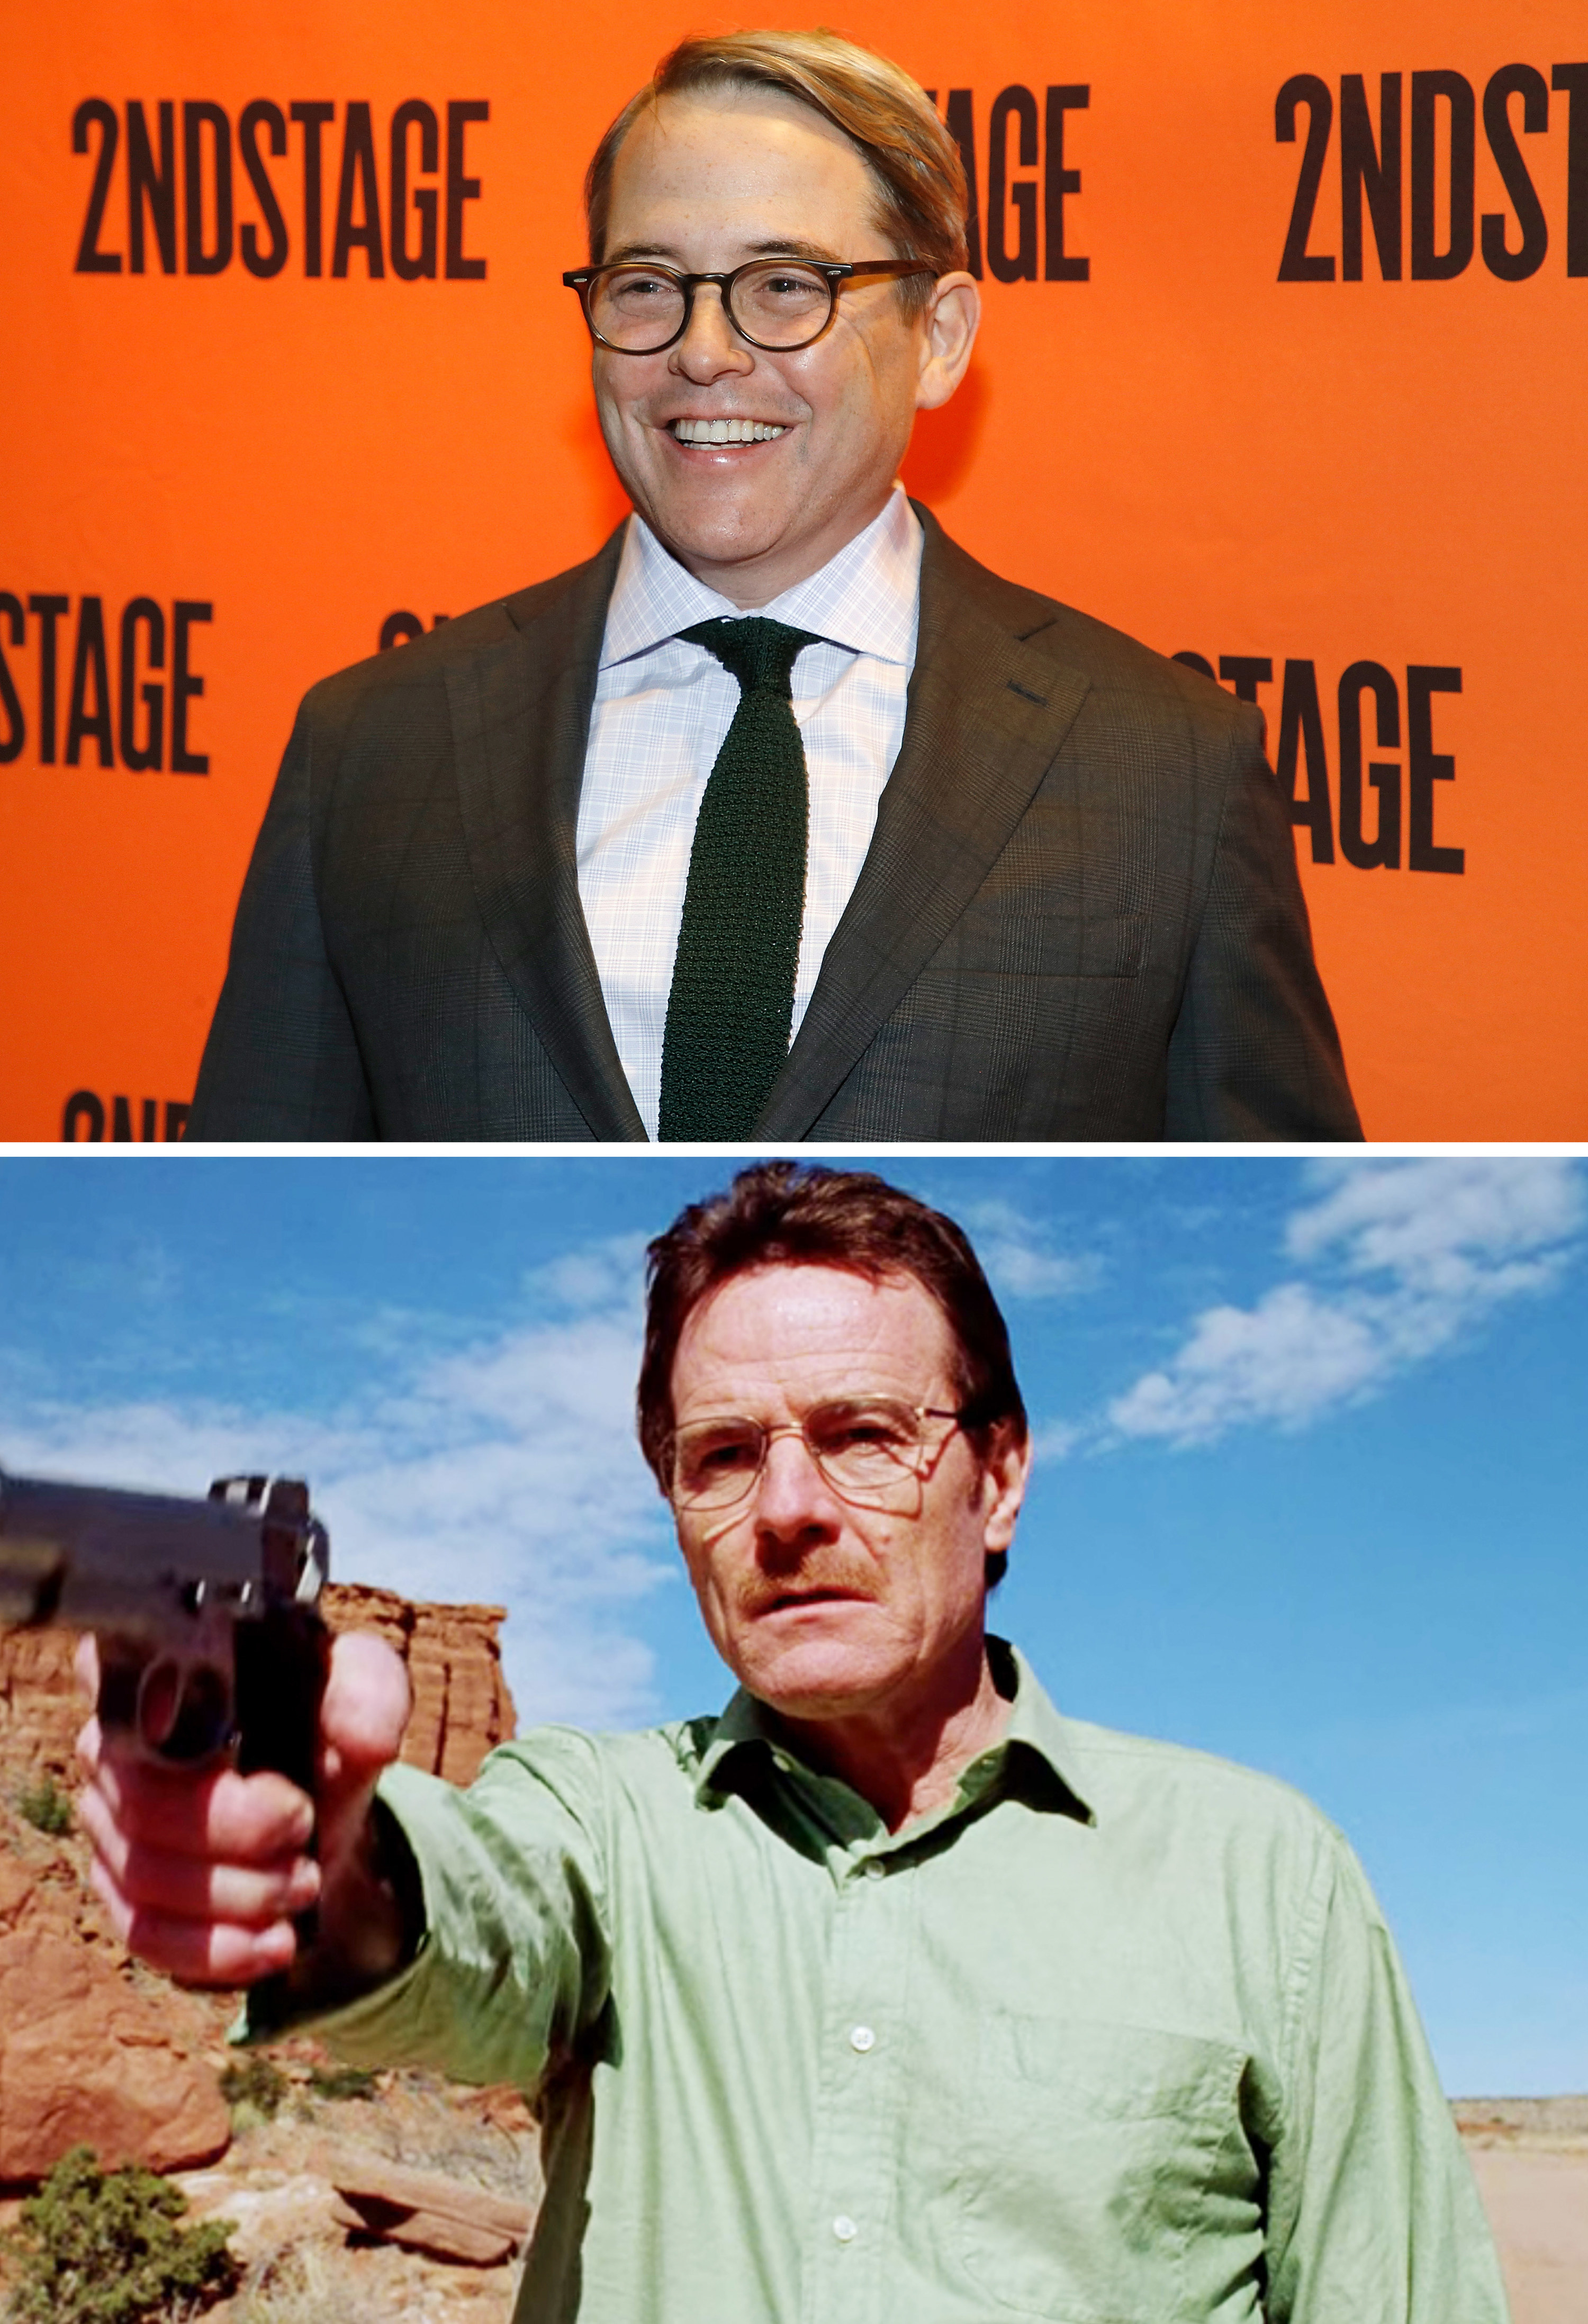 A close-up of Matthew Broderick above a shot of Bryan Cranston as Walter White